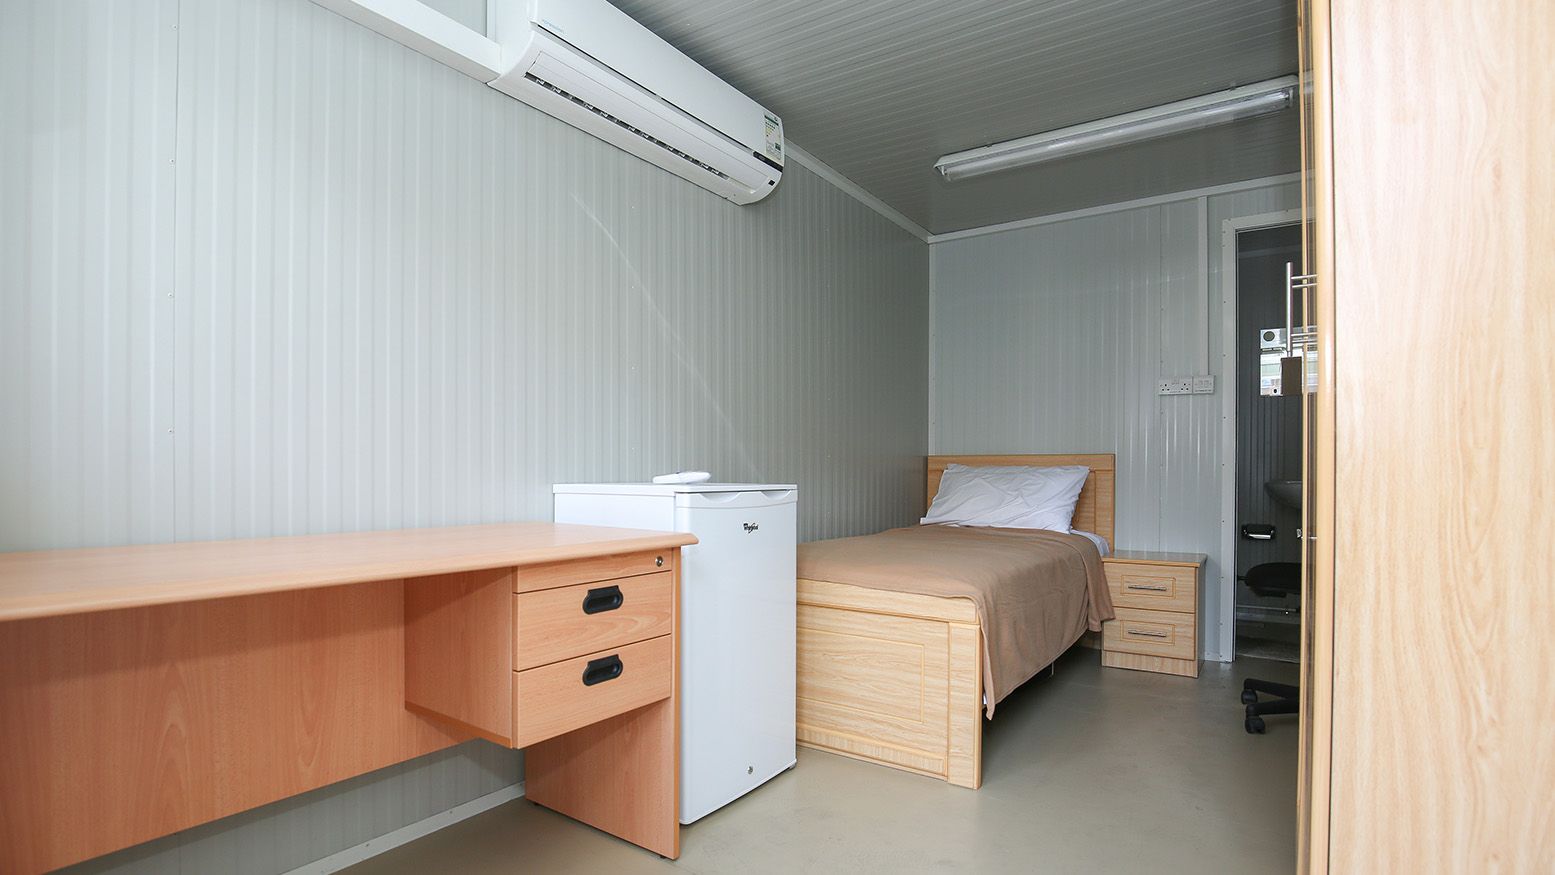 shipping container staff accommodation Dubai MFC Concepts